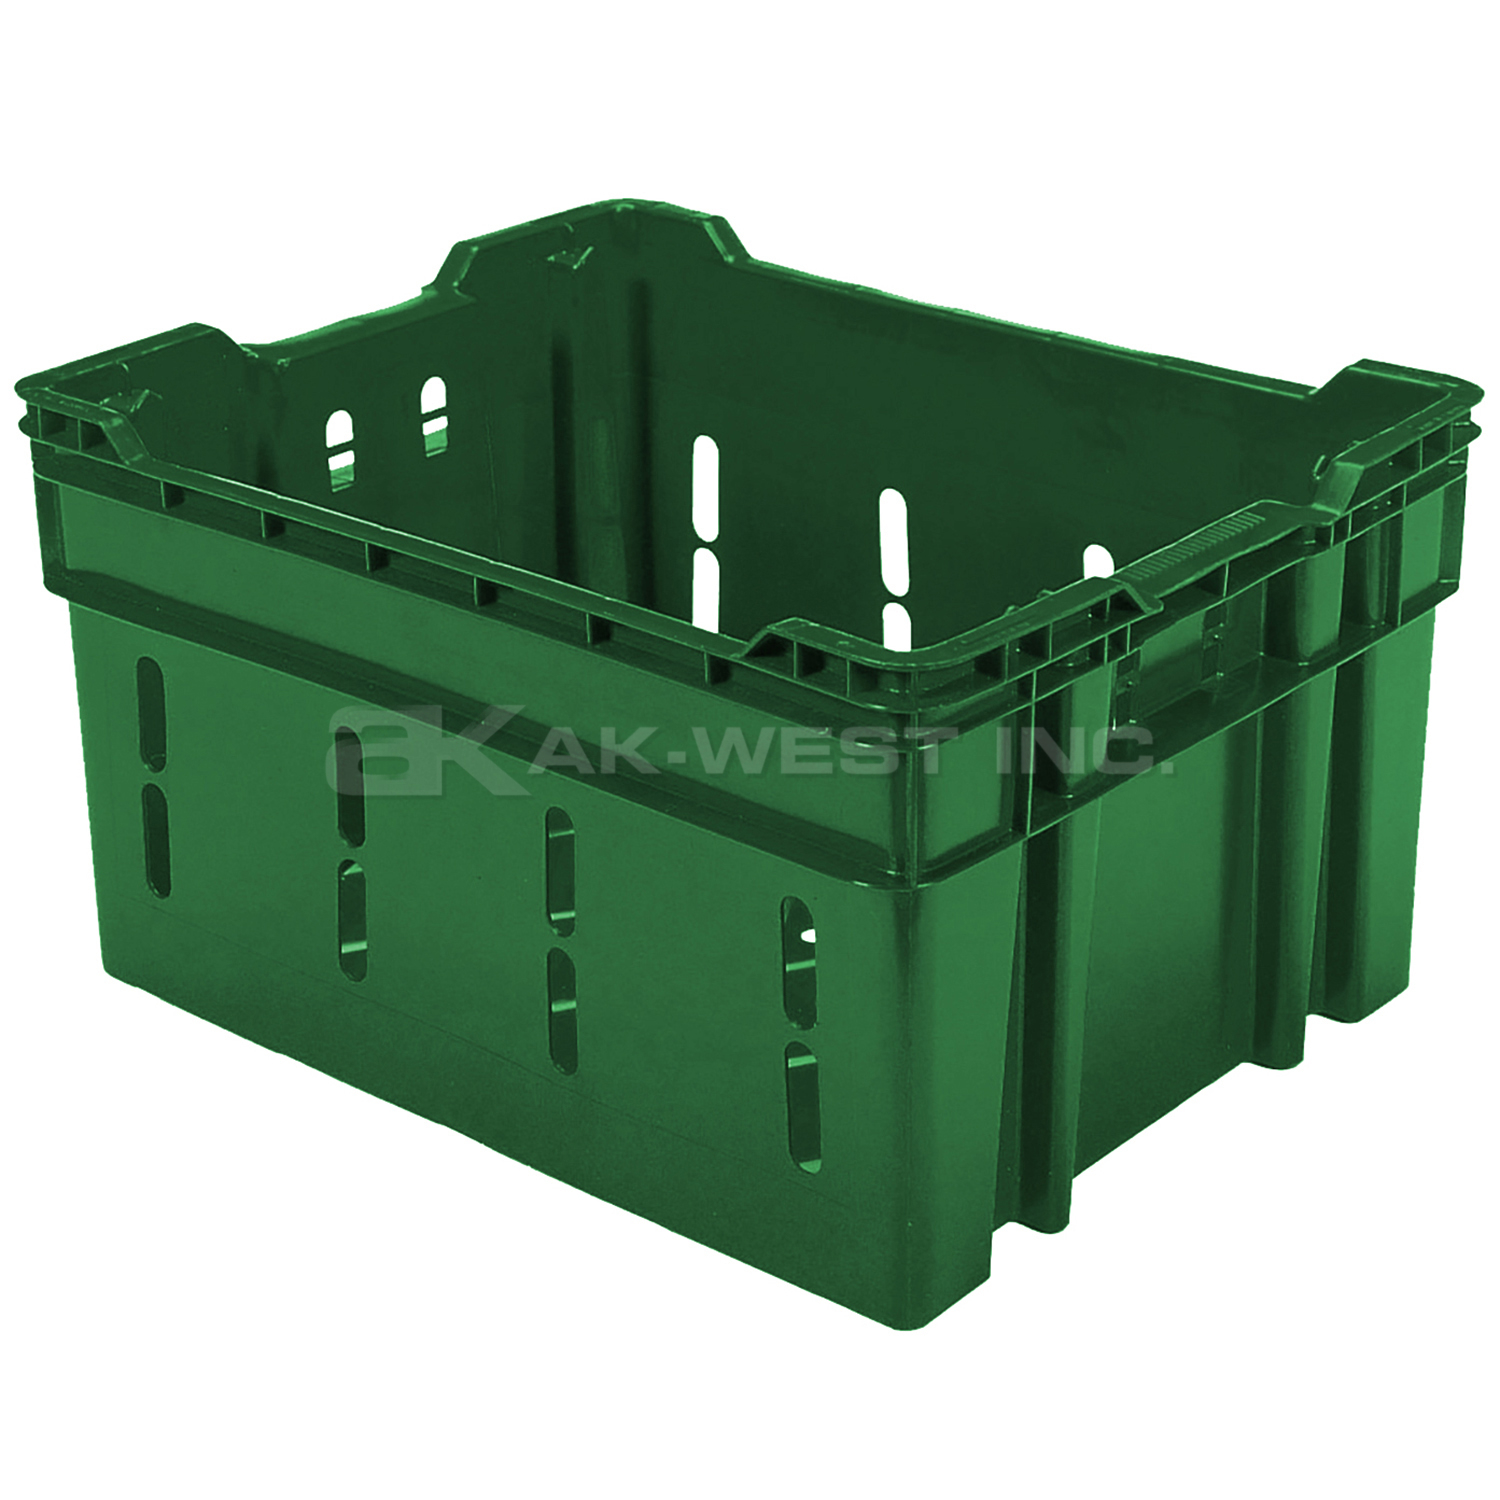 Green, 23-1/2" x 18-1/2" x 12-1/4", Ventilated Stack and Nest Container